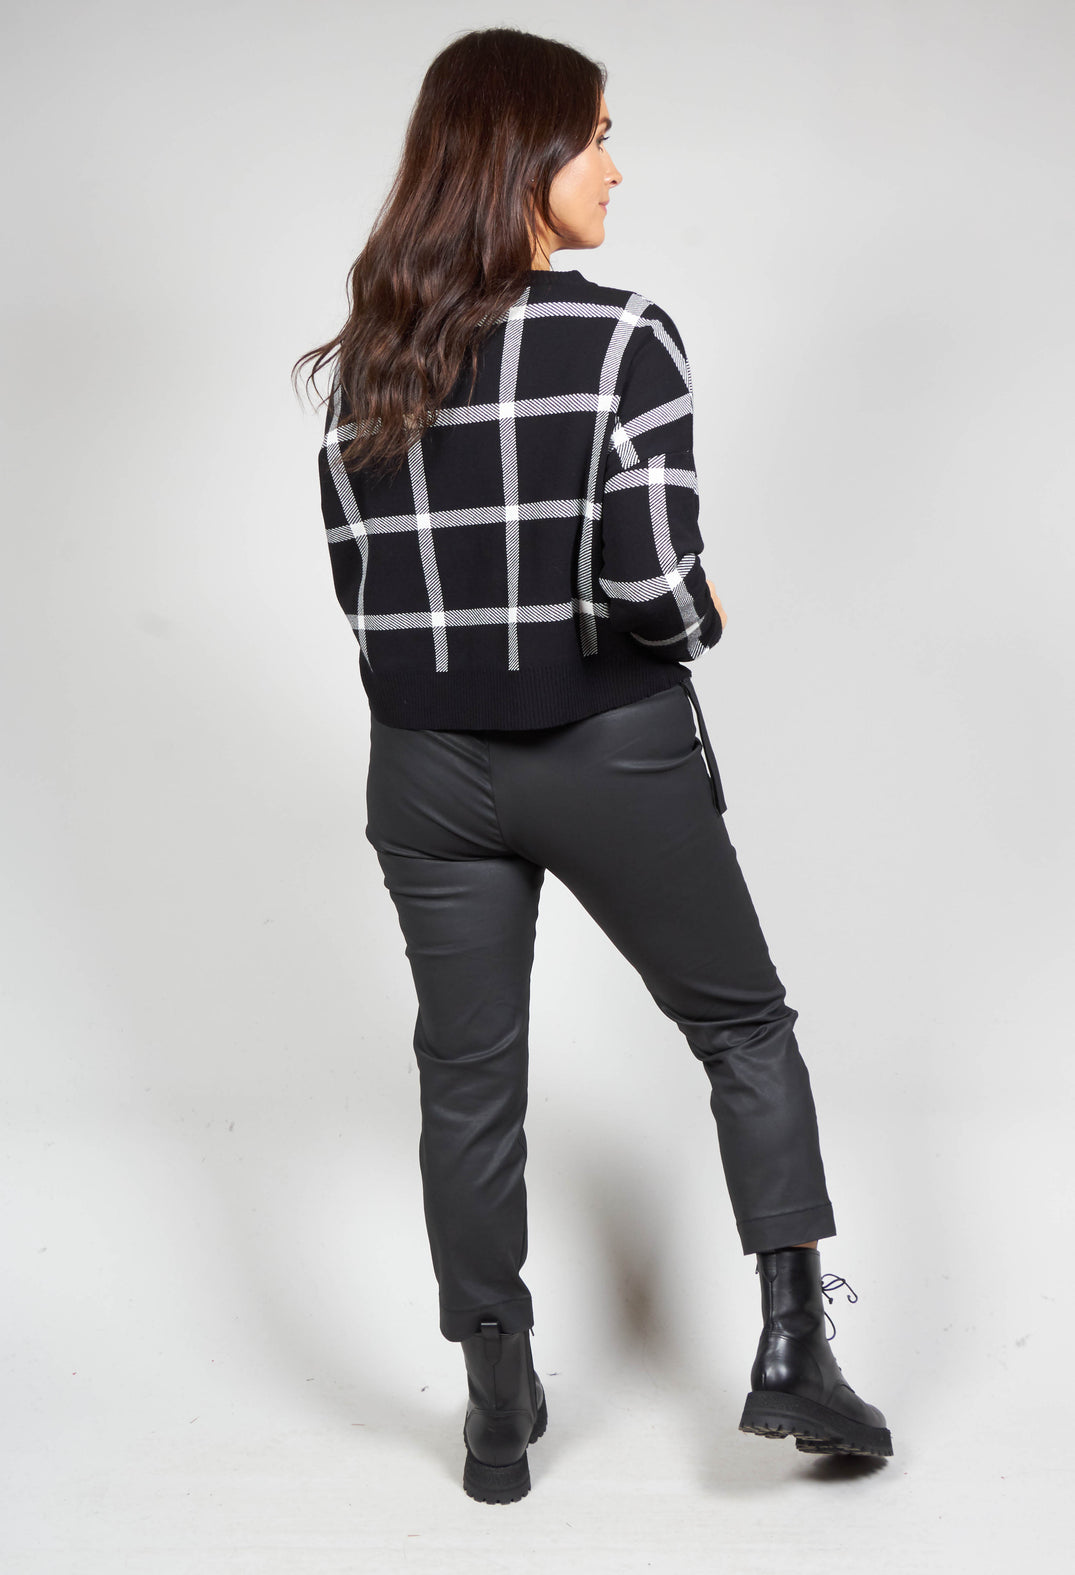 Long Sleeve Jumper with Check Design in Black